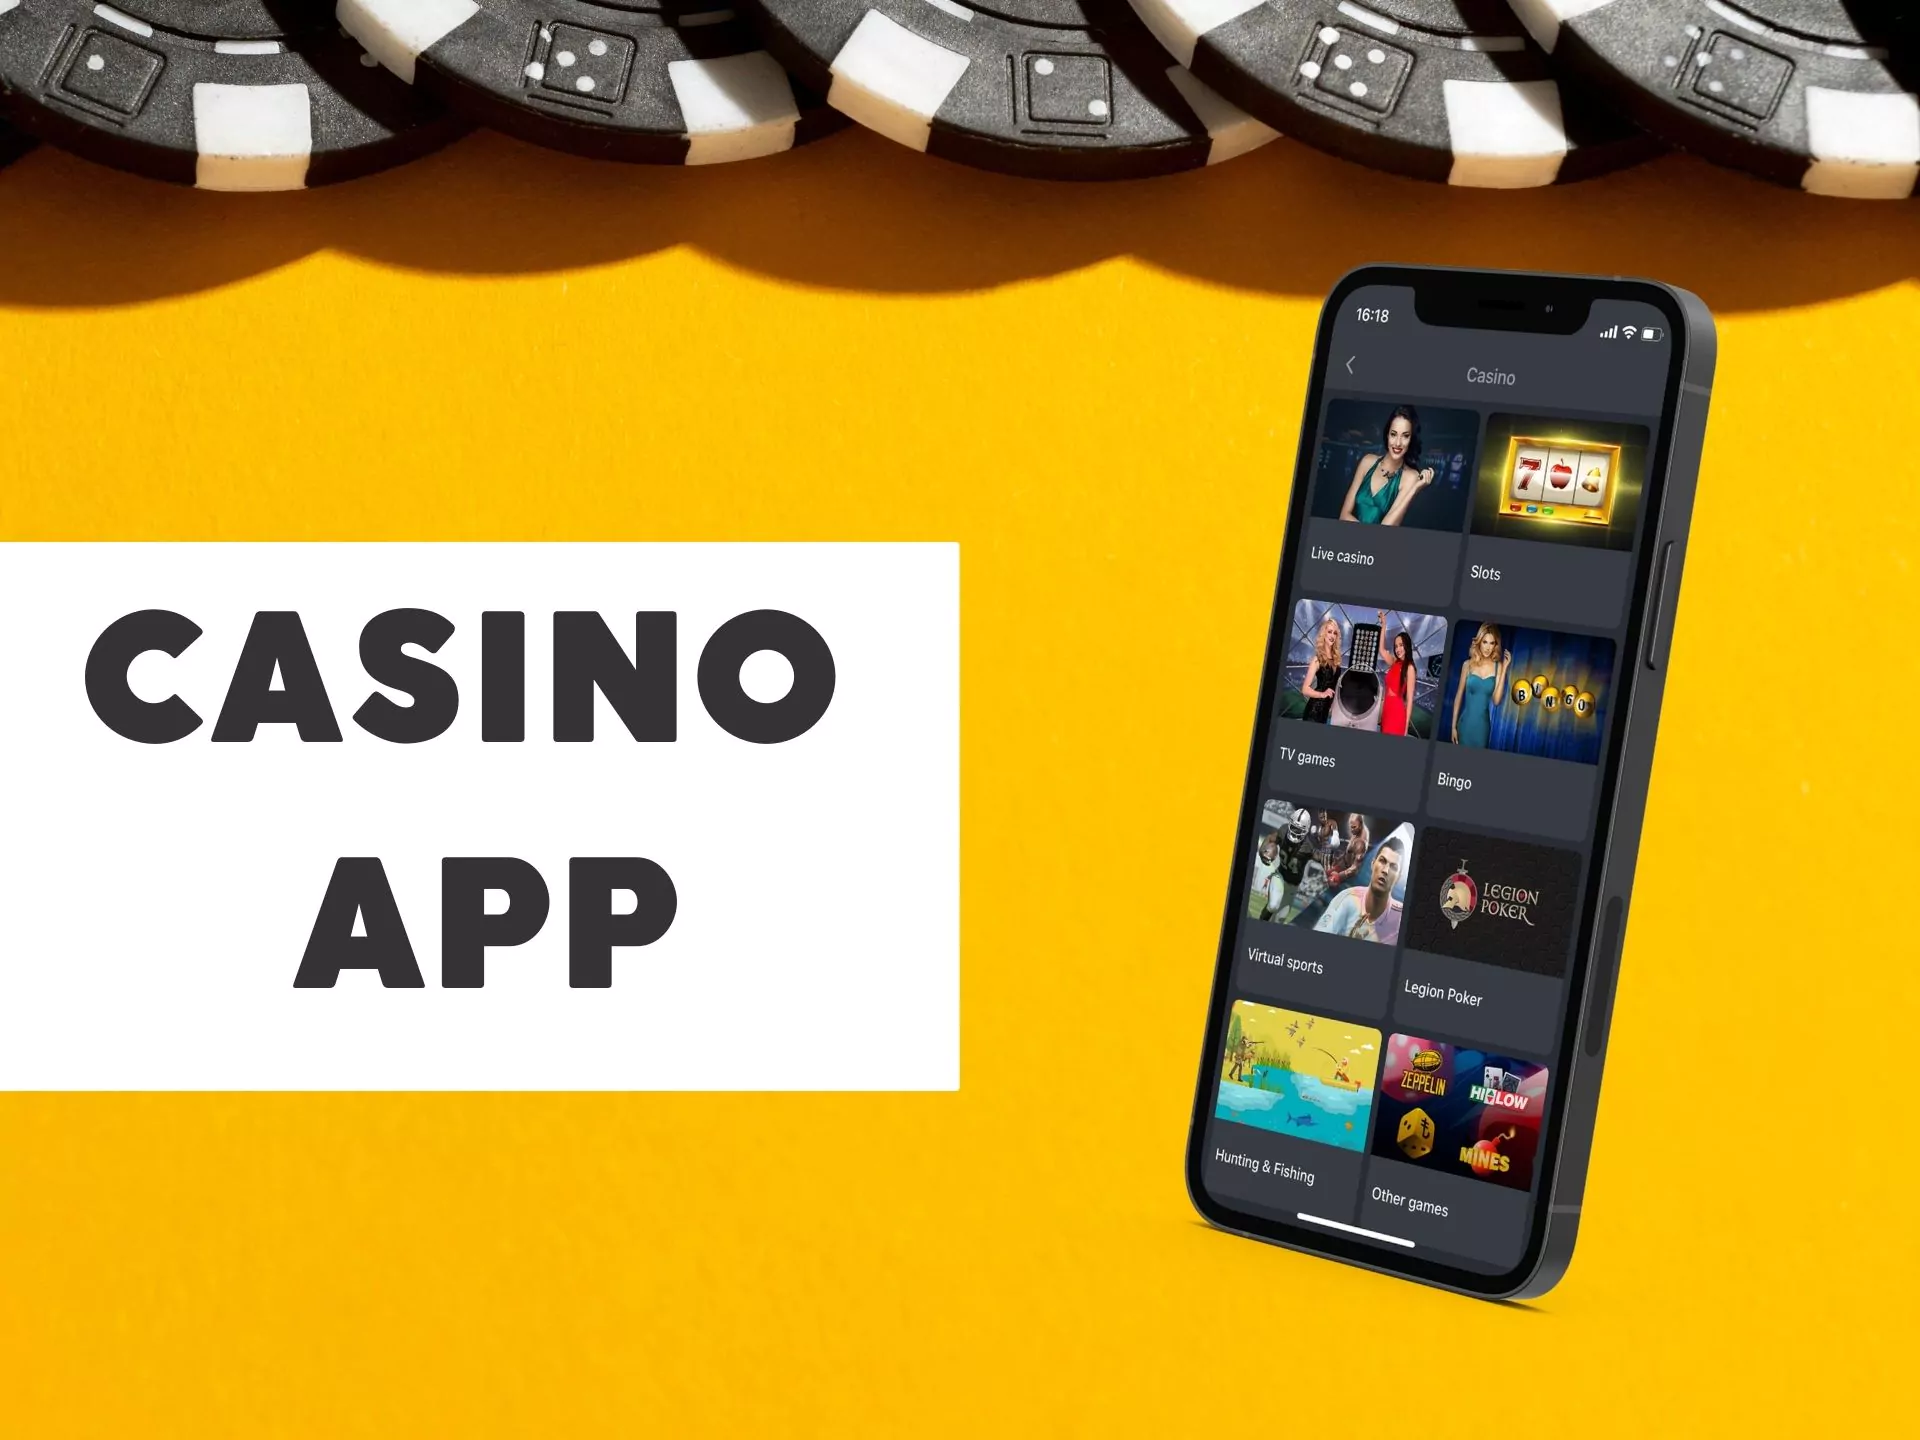 Play online casino games right in the mobile app.